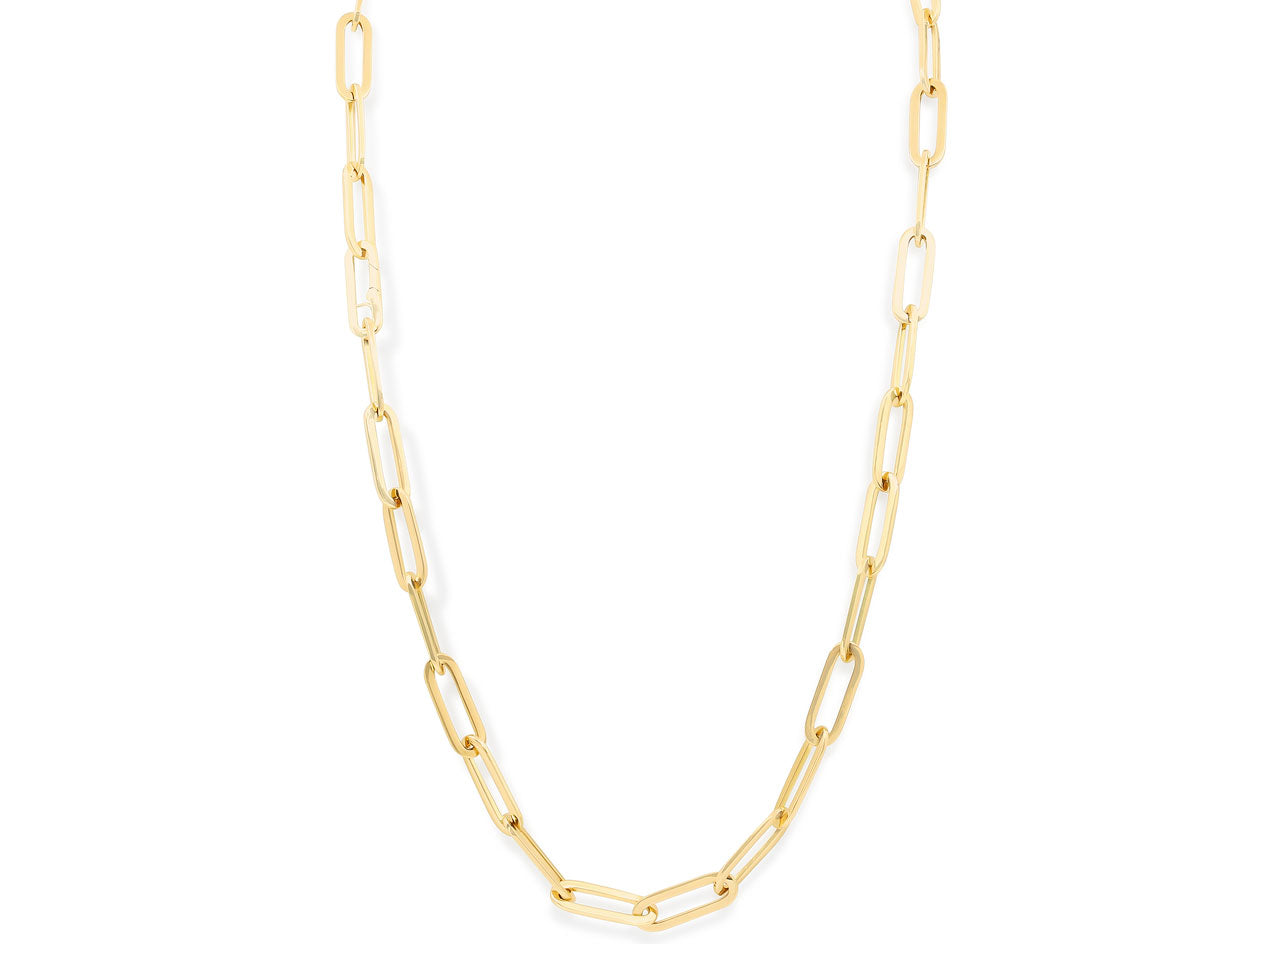 Italian 'Paperclip' Elongated Link Necklace in 18K Gold, by Beladora